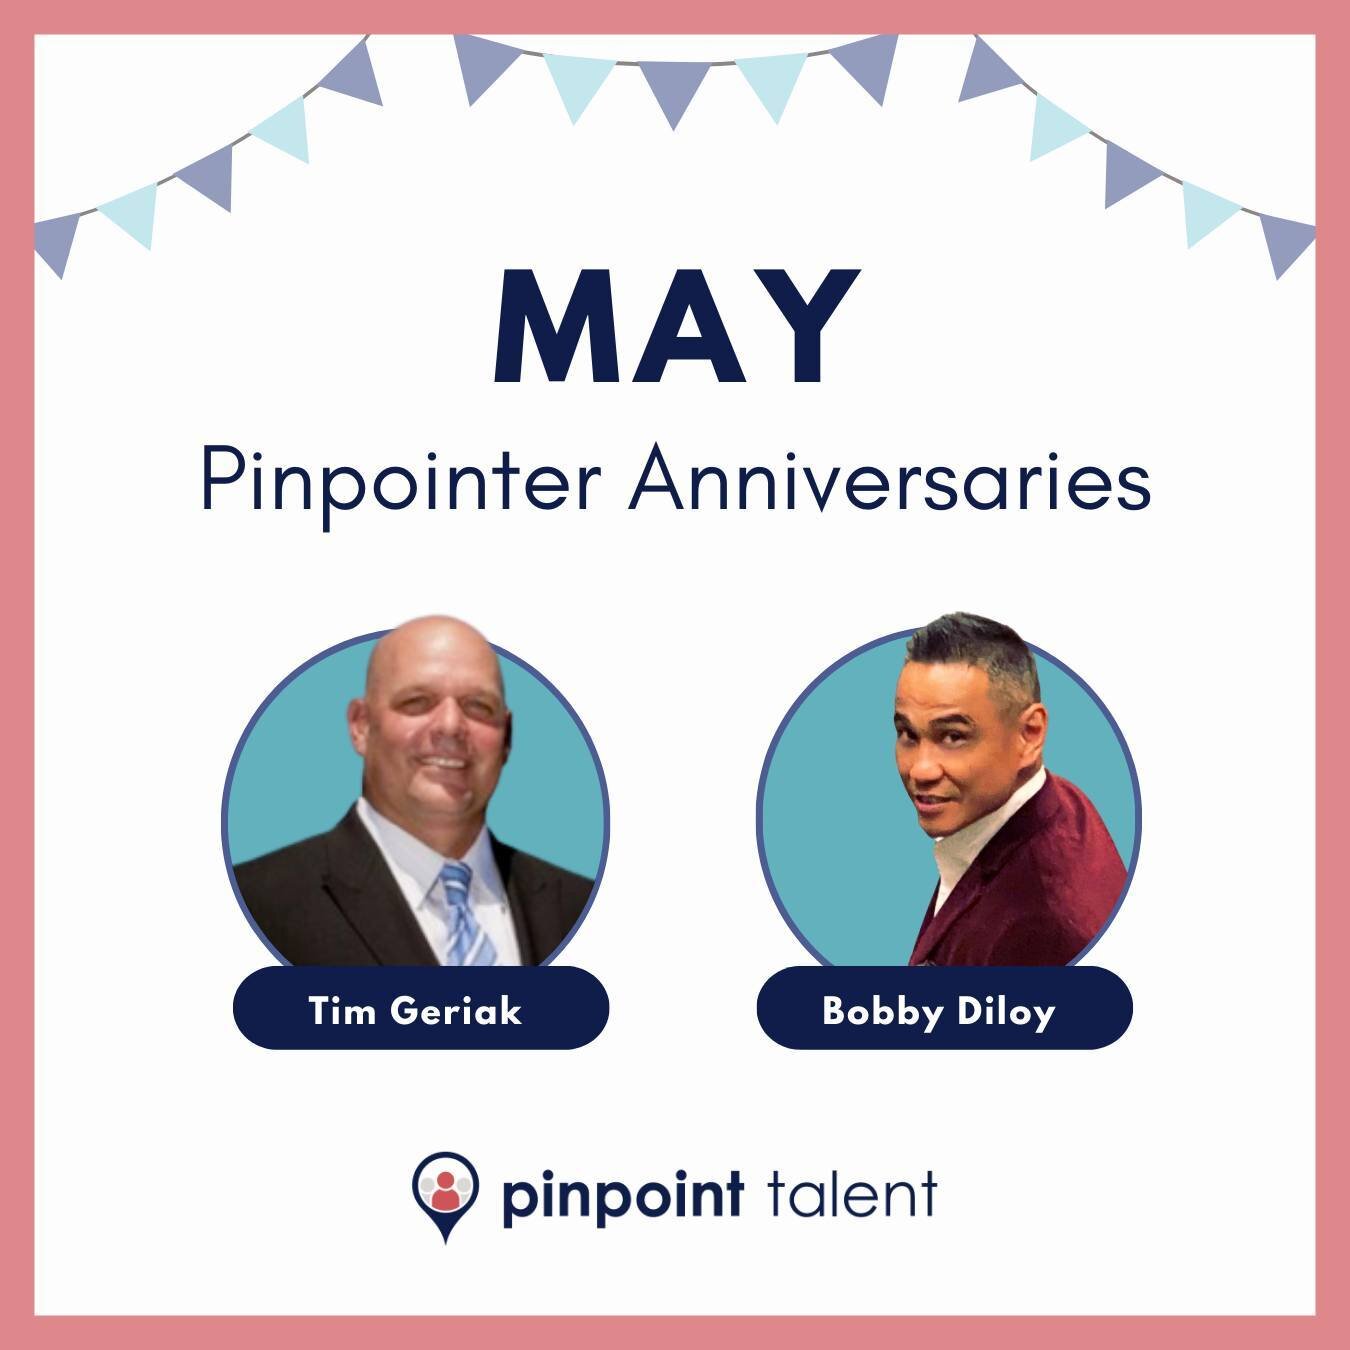 🎉 Please join us in offering a warm congratulations to the Pinpointers who started with us in May. This month we're celebrating two extraordinary individuals, Tim Geriak and Bobby Diloy.

While their styles may vary greatly, both Tim and Bobby contr